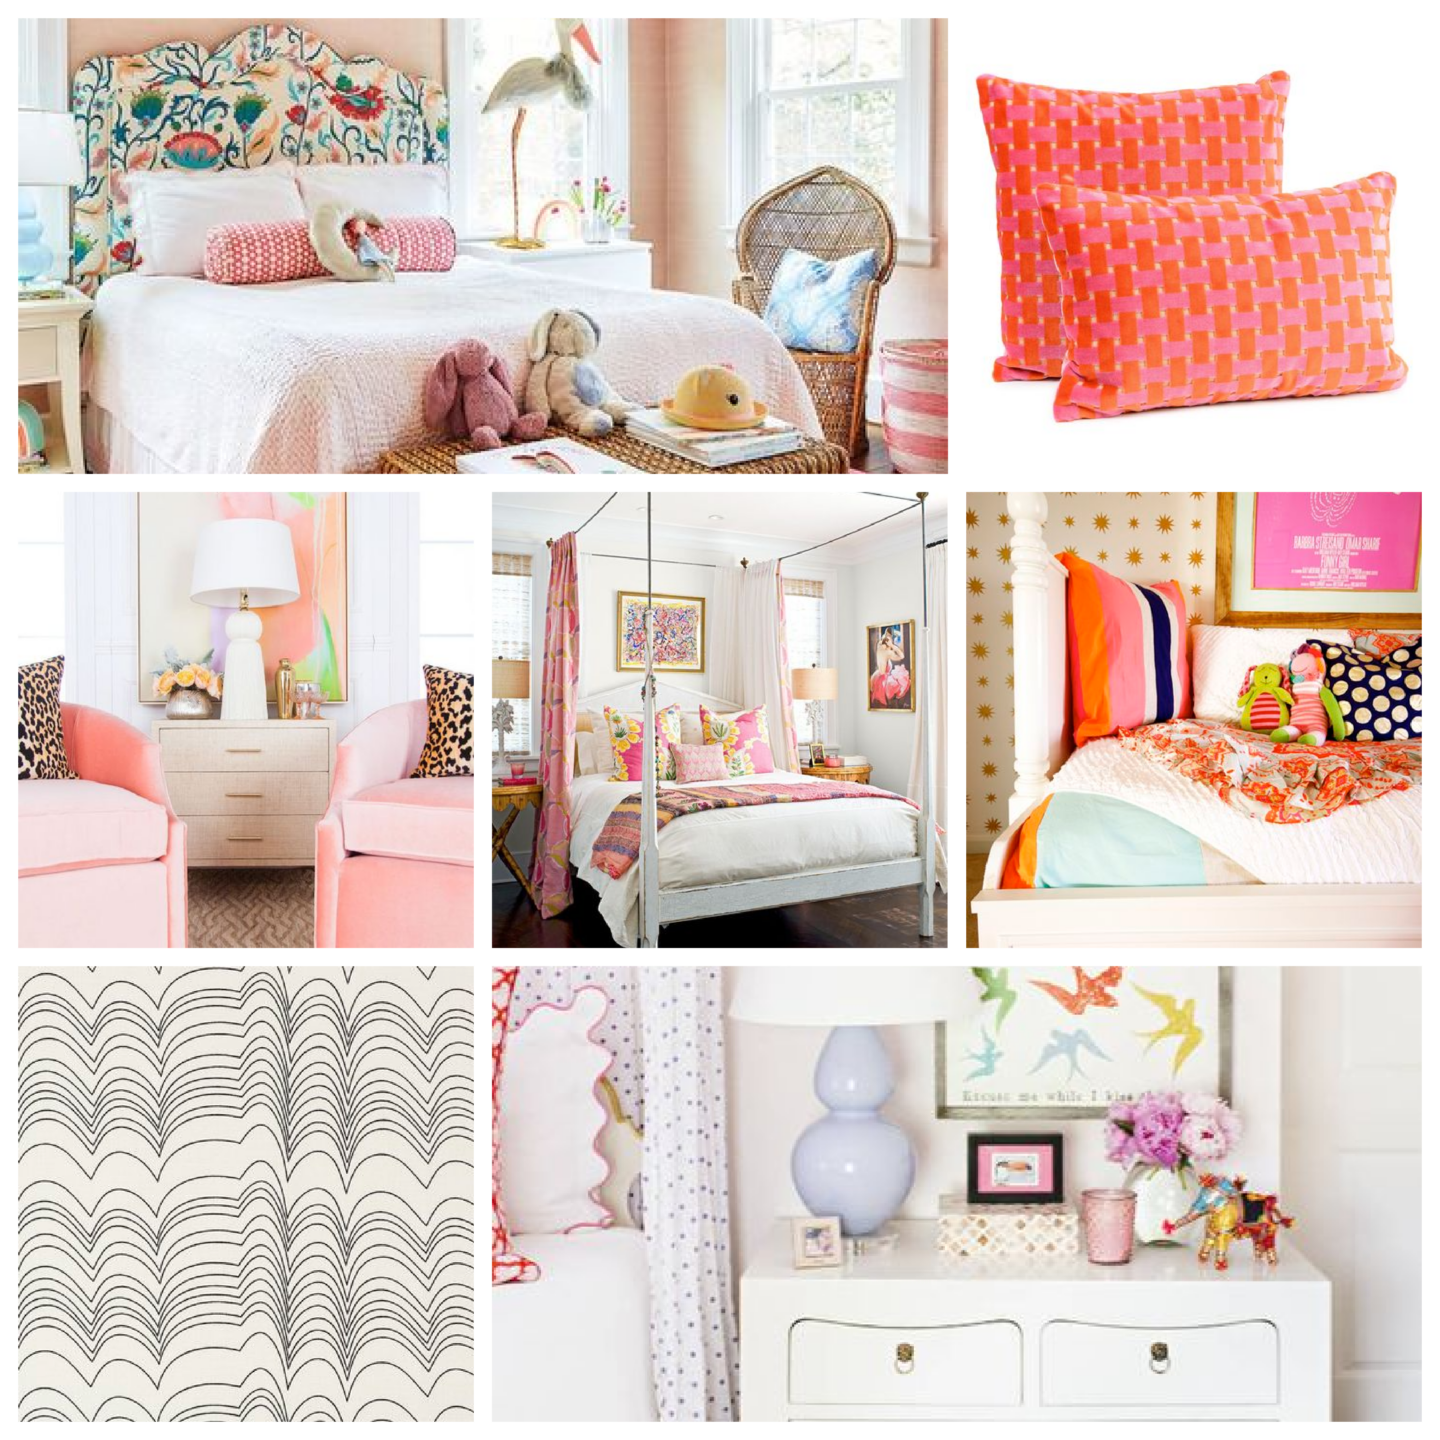 Nashville life and style blog, Hello Happiness: collage image of a colorful tropical print fabric headboard, coral pink show pillows, pink velvet accent chairs, white canopy bed, black and white stripe drapes, and a white dresser with purple flowers in a white vase, a lamp with a white shade and light purple base, pink candle votive, and black and white picture frames. 